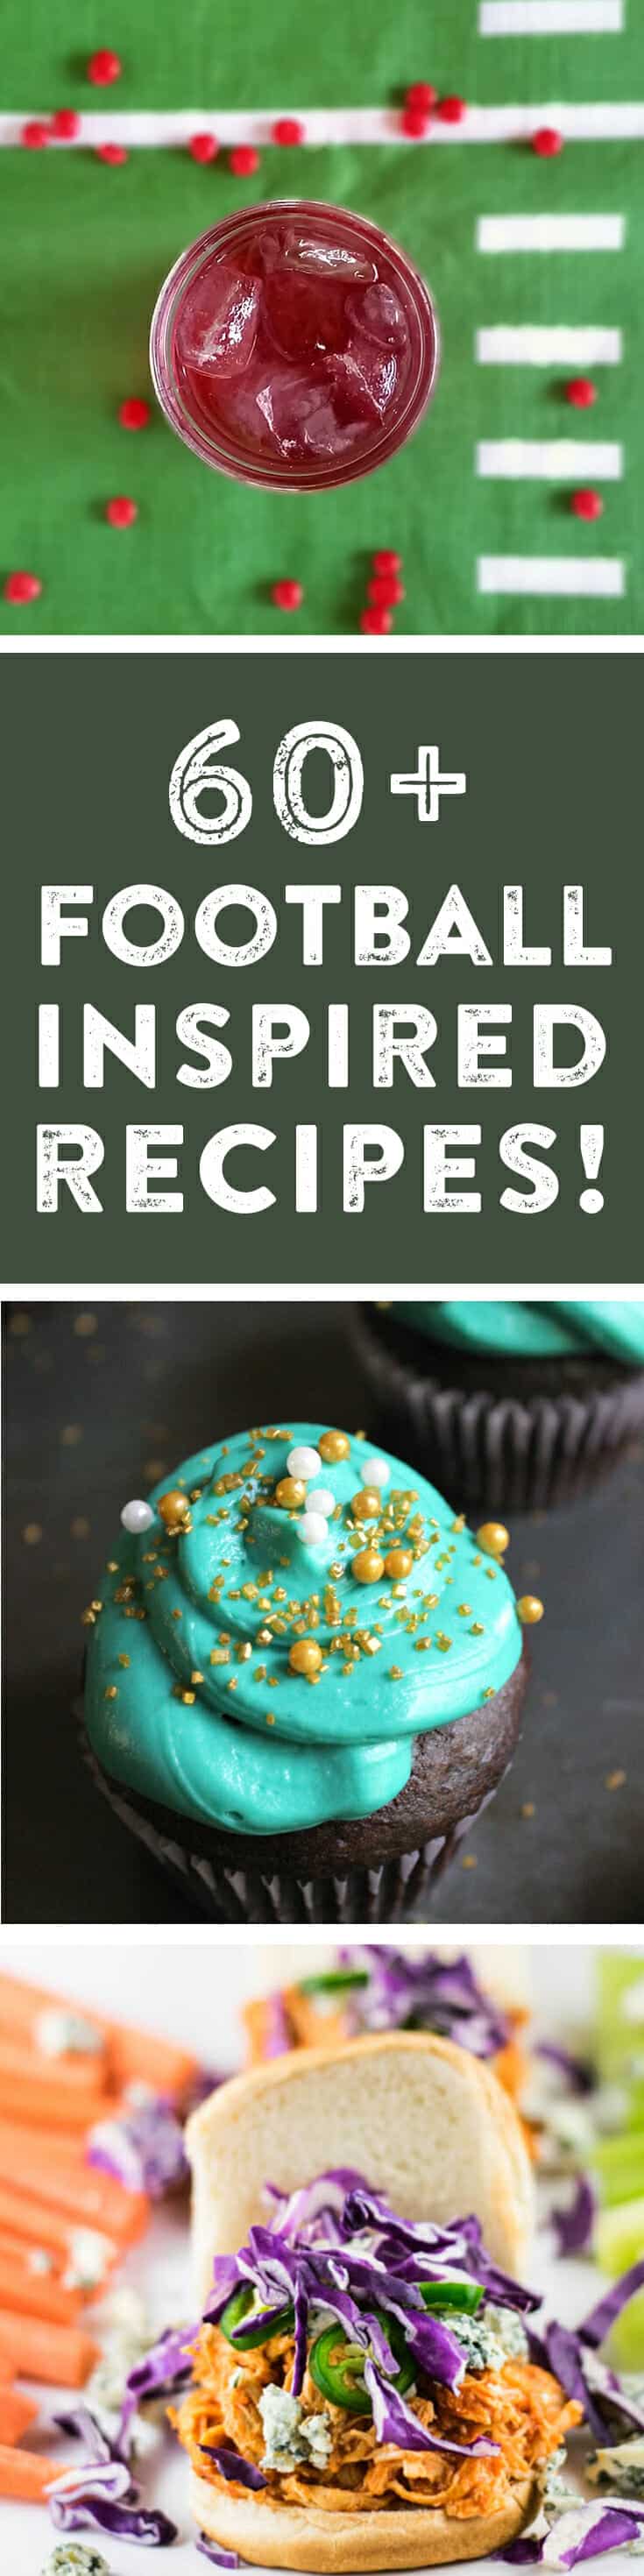 60+ recipes inspired by football teams! Show off your team spirit with everything from appetizer recipes, entree recipes, cocktail recipes, dessert recipes, side dish recipes and more as you cheer on your team! #foodiefootballfans